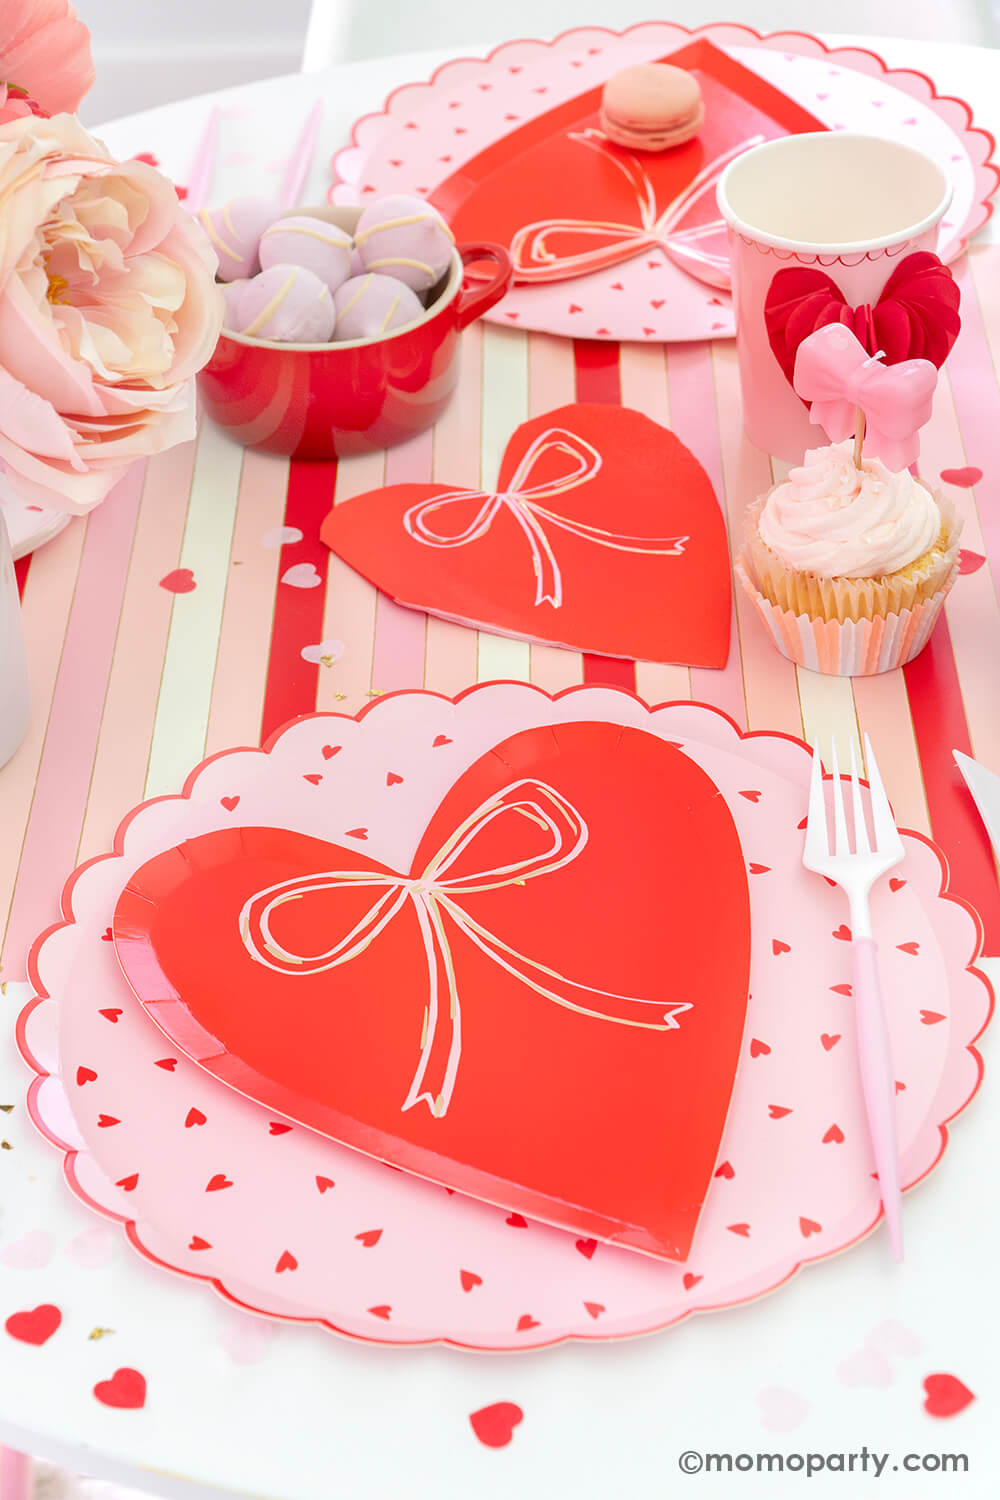 A close-up top view of Momo Party's sweet Pink and Red Bow-Themed Valentine's Day Party table. Featuring a delectable macaron on the Meri Meri Heart With Bow Plates layered with Heart Pattern Dinner Plates, Heart With Bow Napkins, Honeycomb Heart Cups, Blush and White Cutlery Set, Pink Bow Candles atop cupcakes, and sweets in the red Mini Cocotte. All elegantly arranged on a red-striped paper runner. Such a cute idea for elevating your Valentine's celebration or Galentine's Day with your besties.